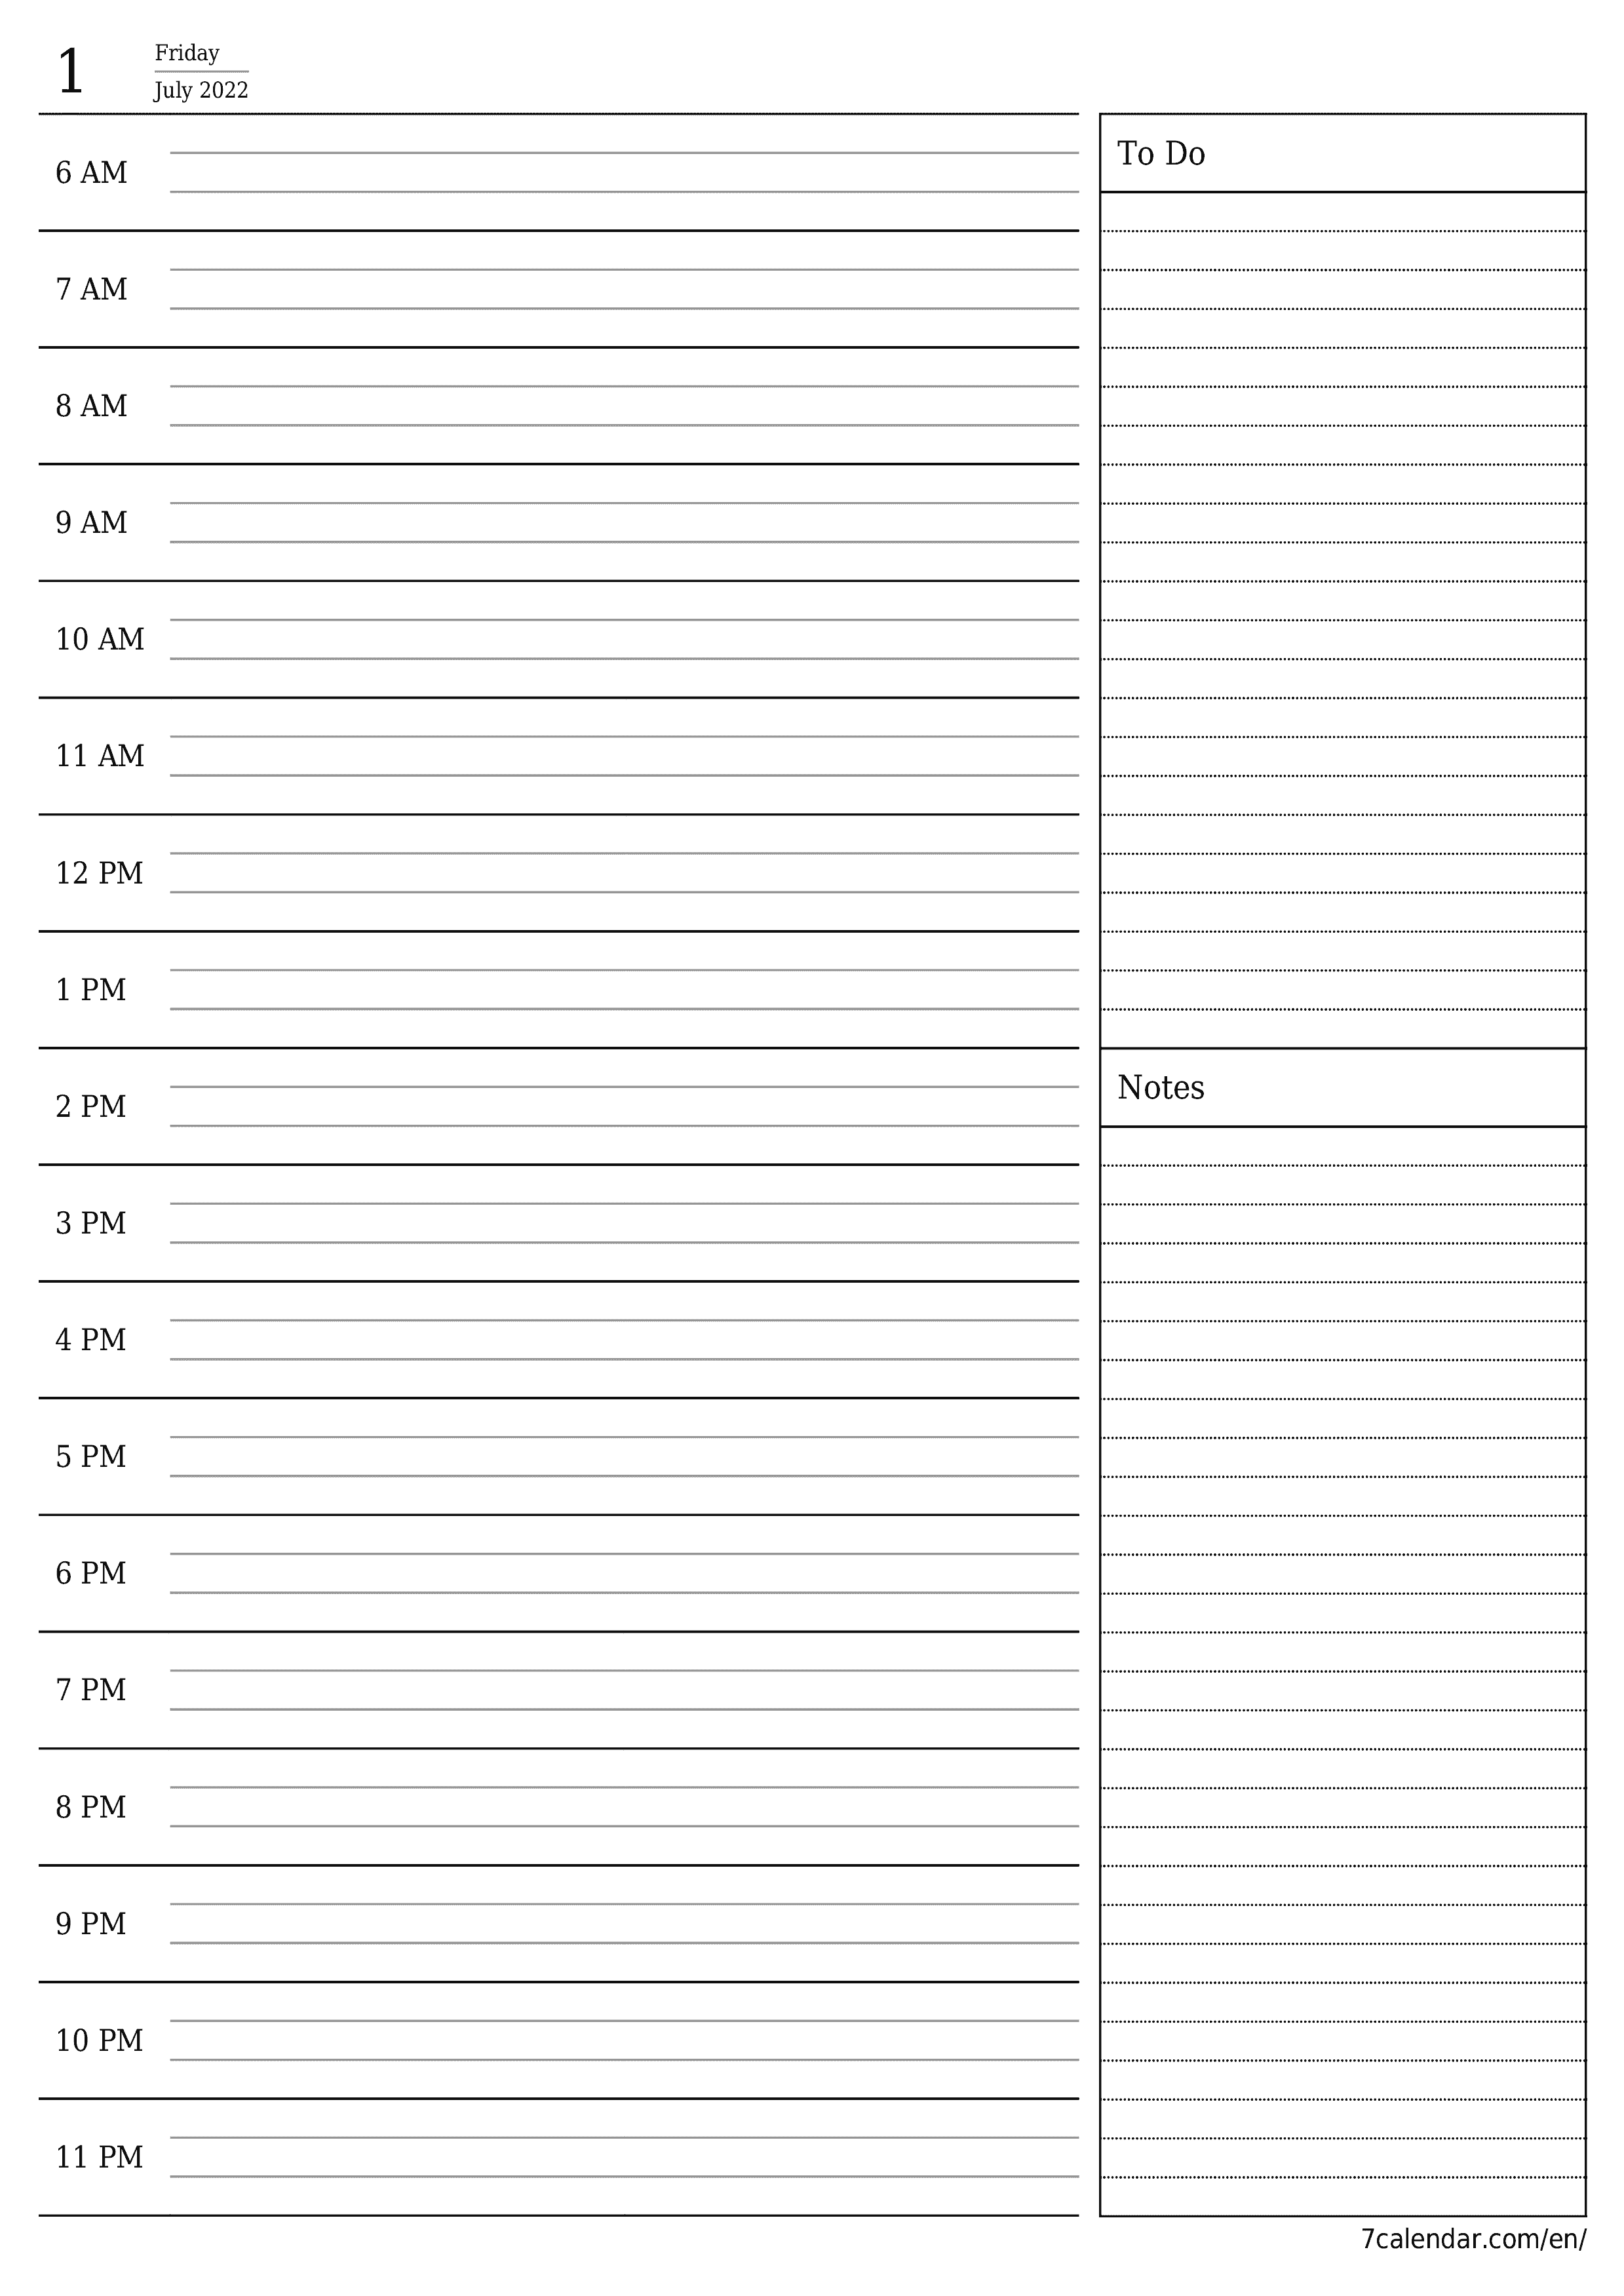 Blank daily printable calendar and planner for day July 2022 with notes, save and print to PDF PNG English